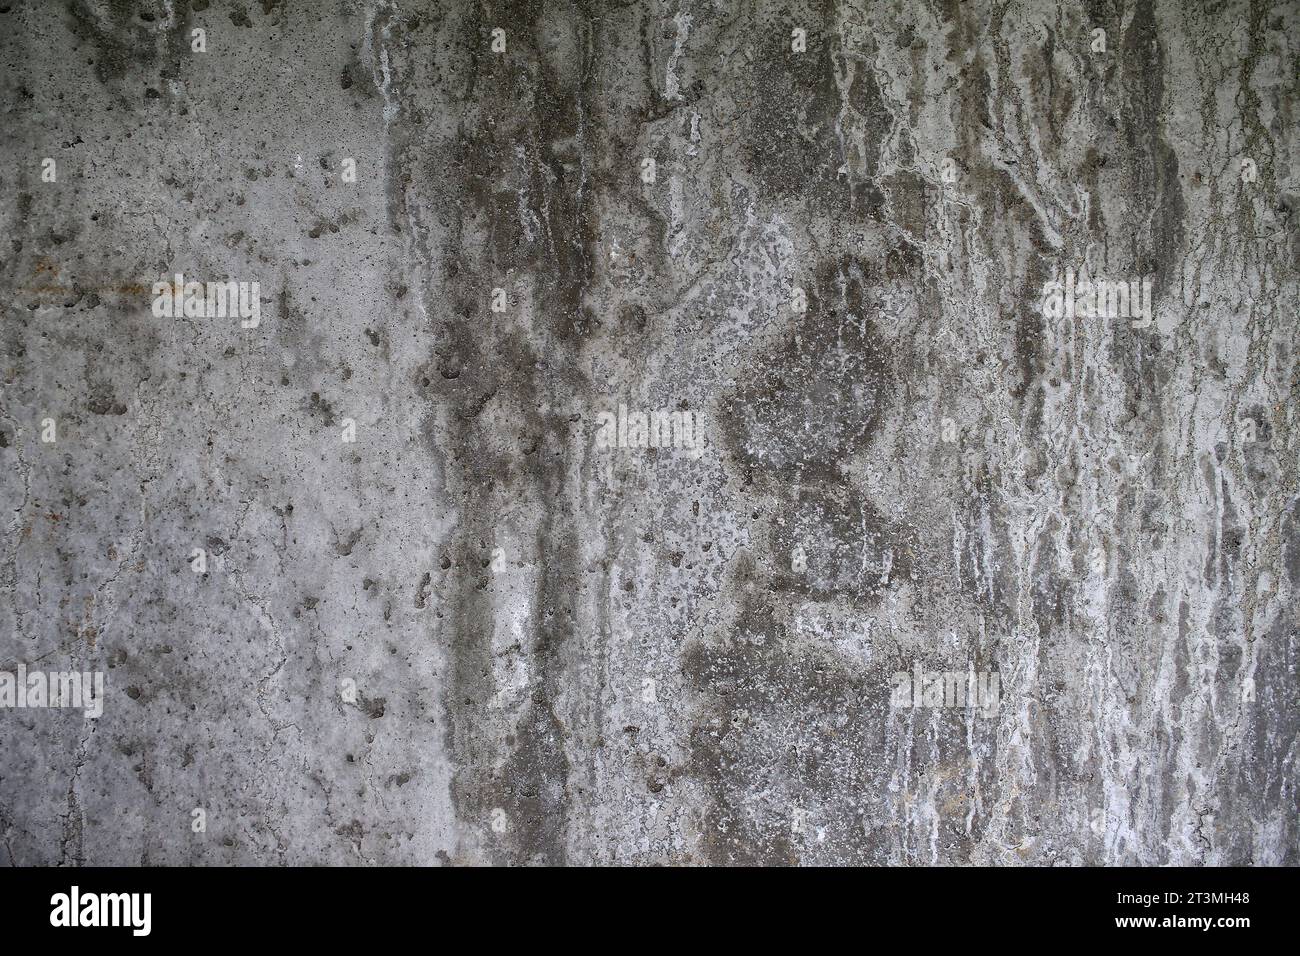 Stained concrete texture close up of wall. Stock Photo